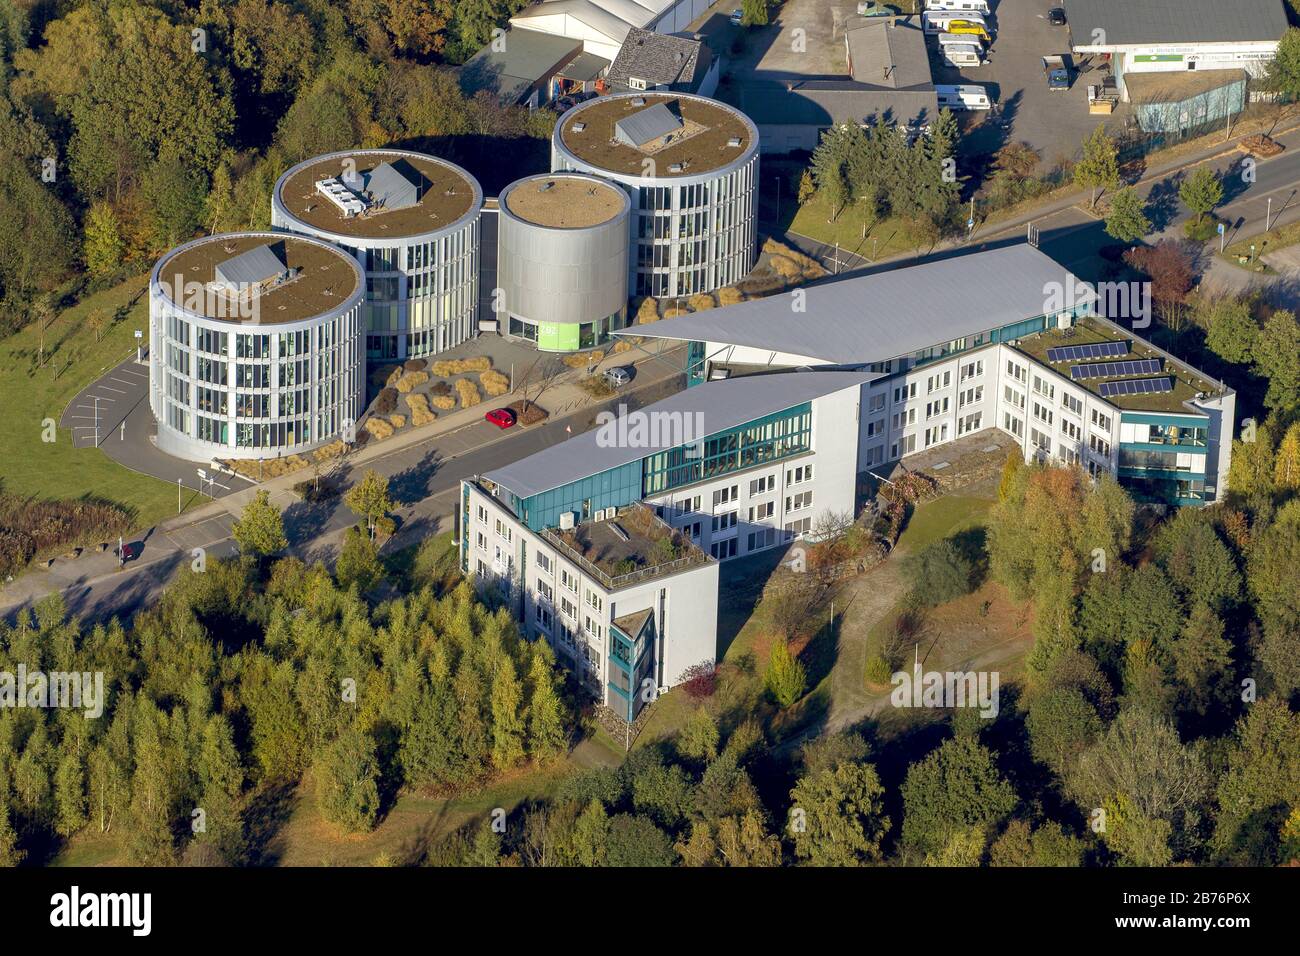 Institute of Environmental Engineering and Management at the University of Witten  Herdecke, University Dental Clinic, 28.10.2012, aerial view, Germany, North  Rhine-Westphalia, Ruhr Area, Witten Stock Photo - Alamy